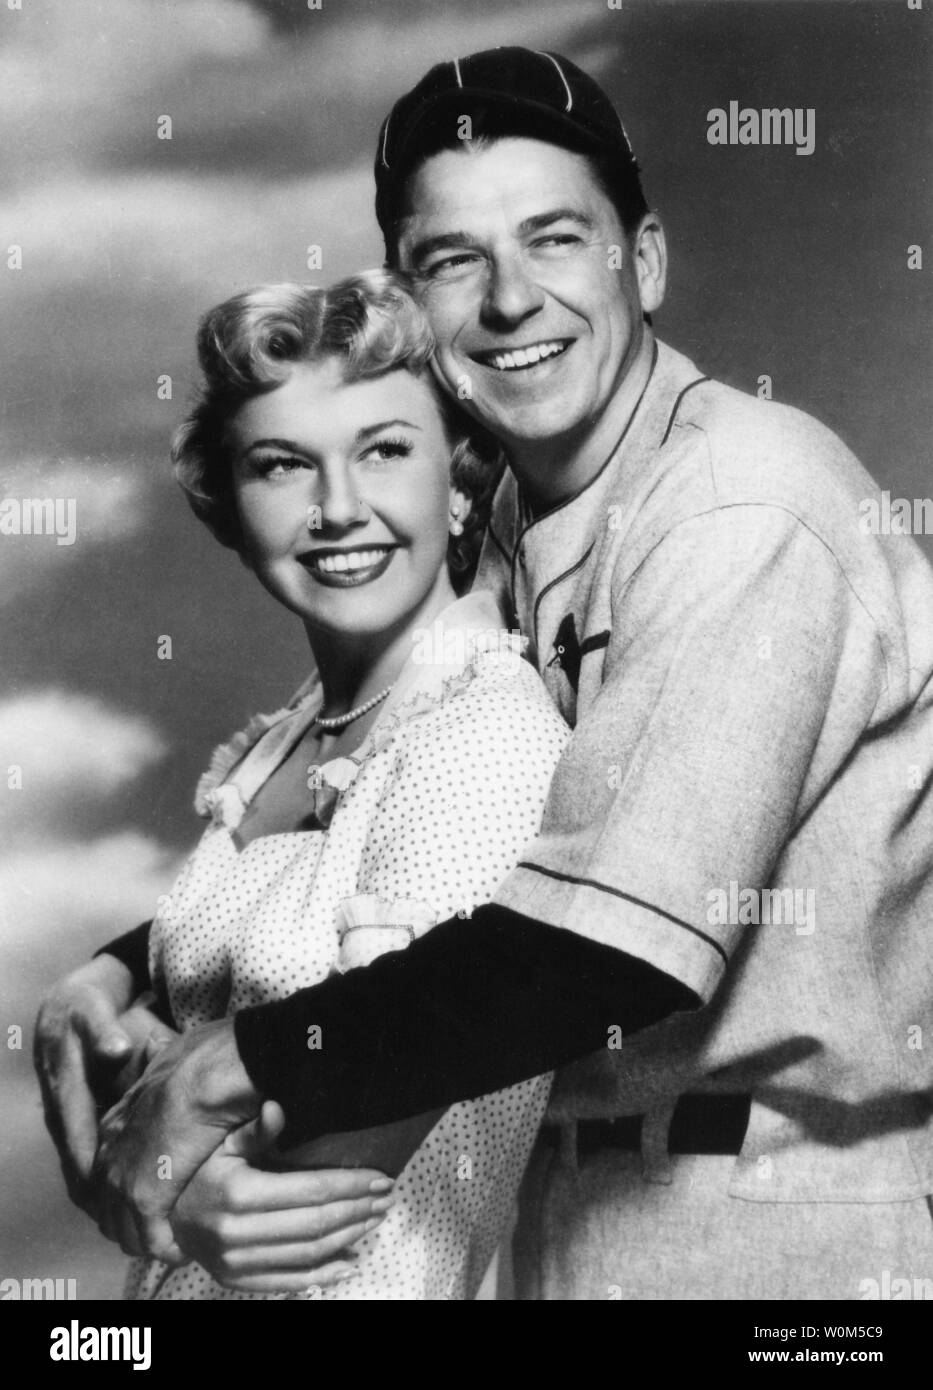 President Ronald Reagan is seen here during his years as an actor with co-star Doris Day in the 1952 movie, 'The Winning Team', about baseball great Grover Cleveland Alexander. Reagan, the 40th President of the United States of America, was instrumental in bringing about the collapse of communism and an end to the Cold War. The former President is now 92 and has been suffering from alzheimer's for over ten years. (UPI/File) Stock Photo